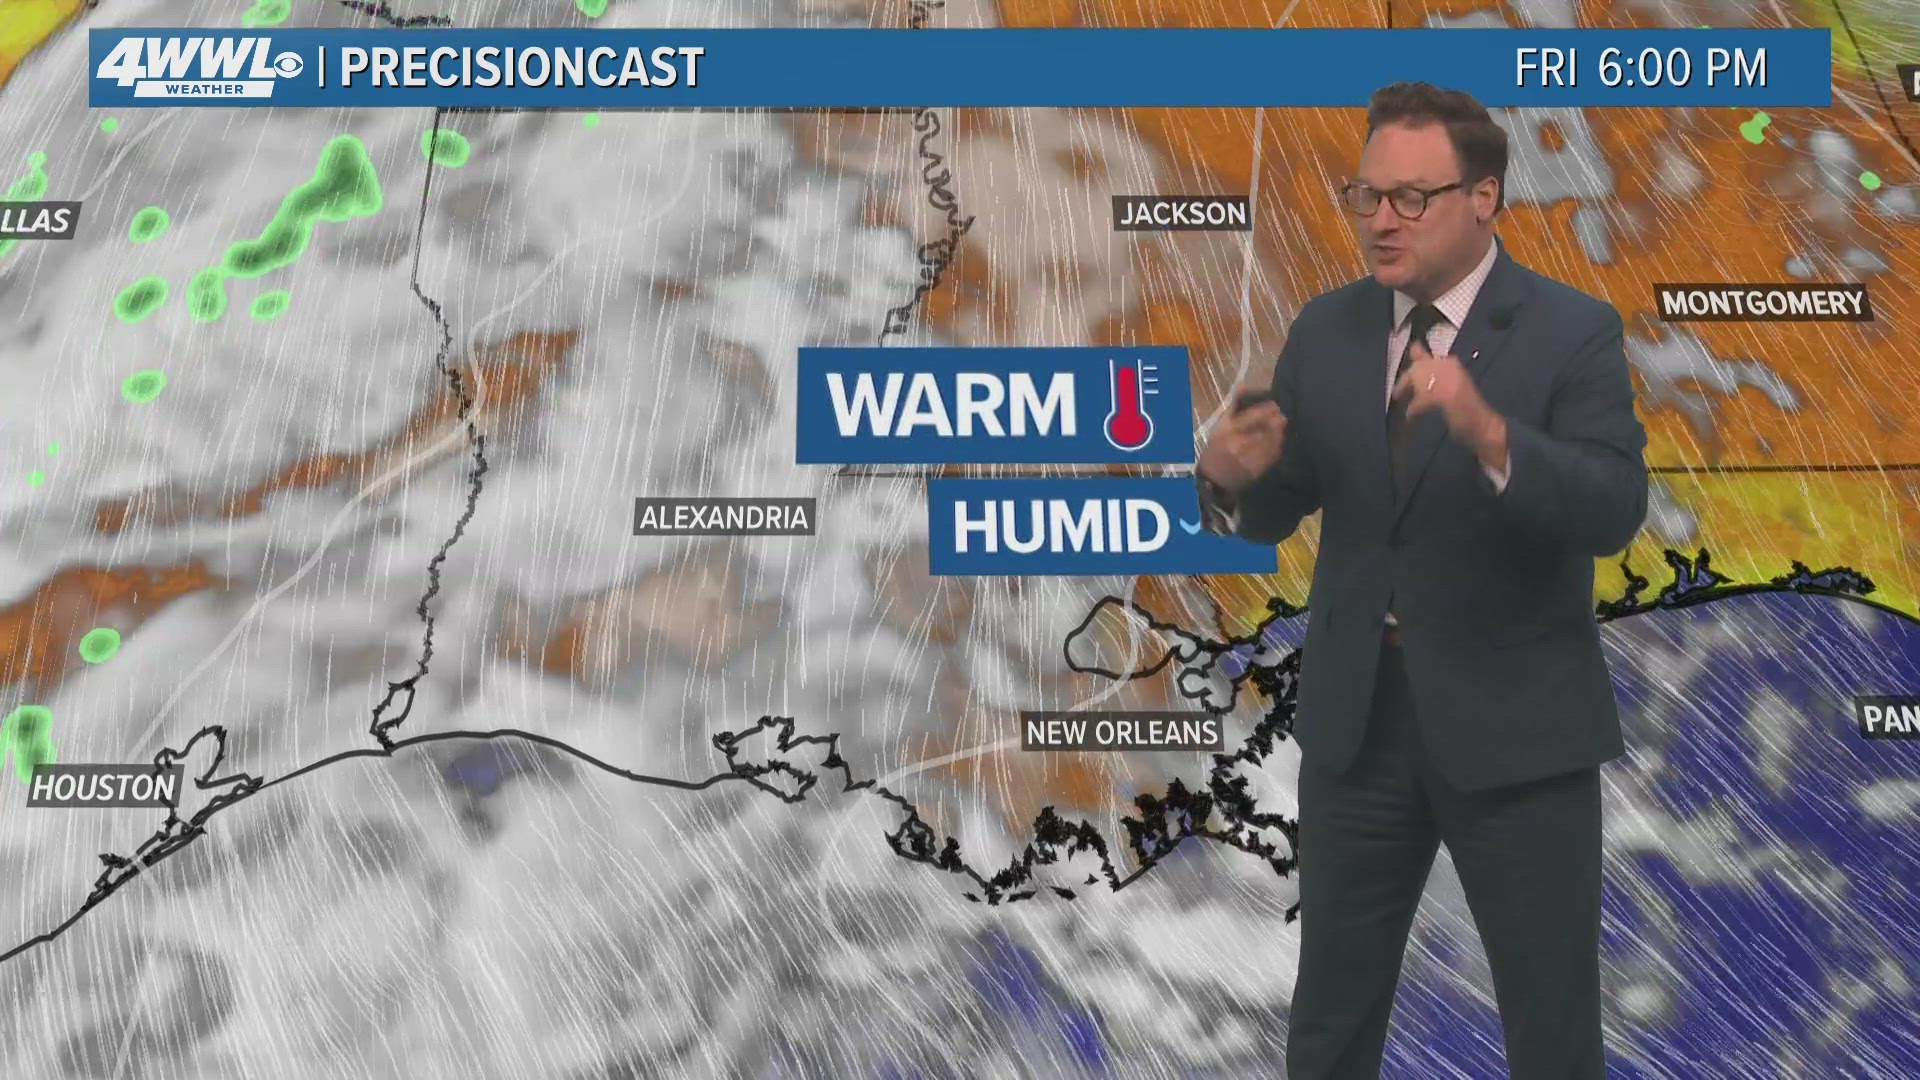 Chief Meteorologist Chris Franklin says the warmer and more humid air is beginning to move in and will stick around all weekend.